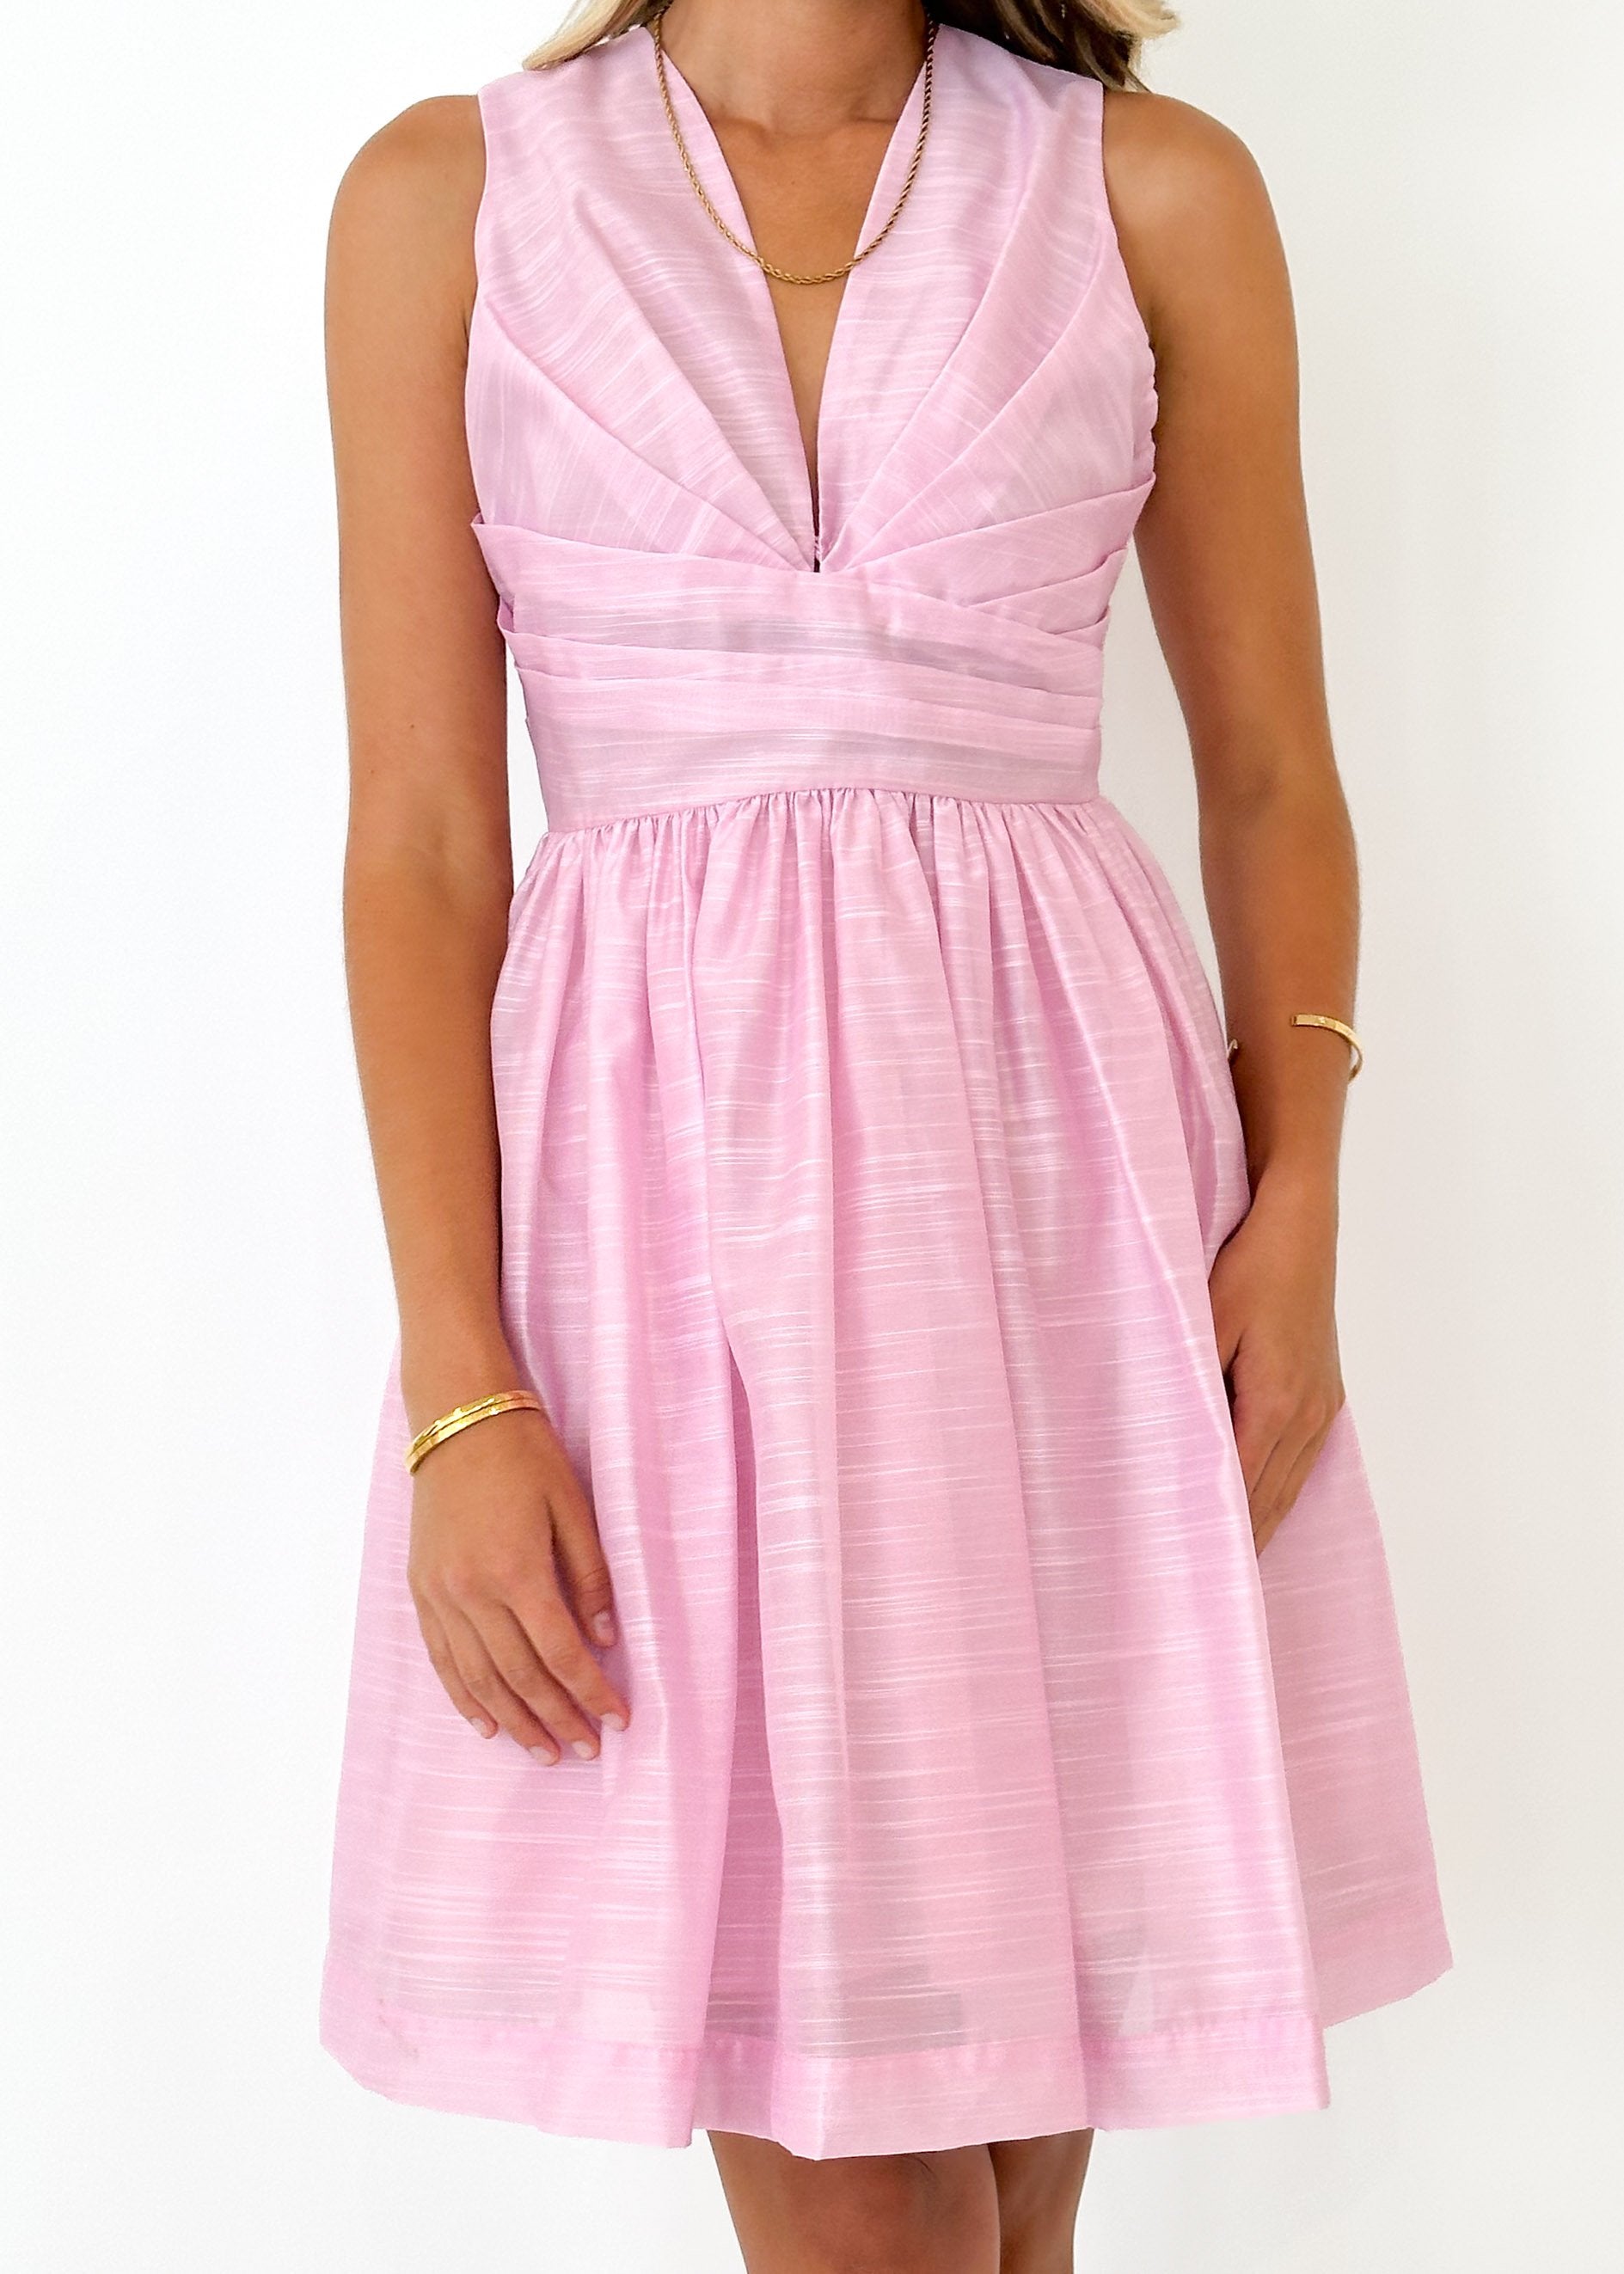 Sayso Dress - Pink